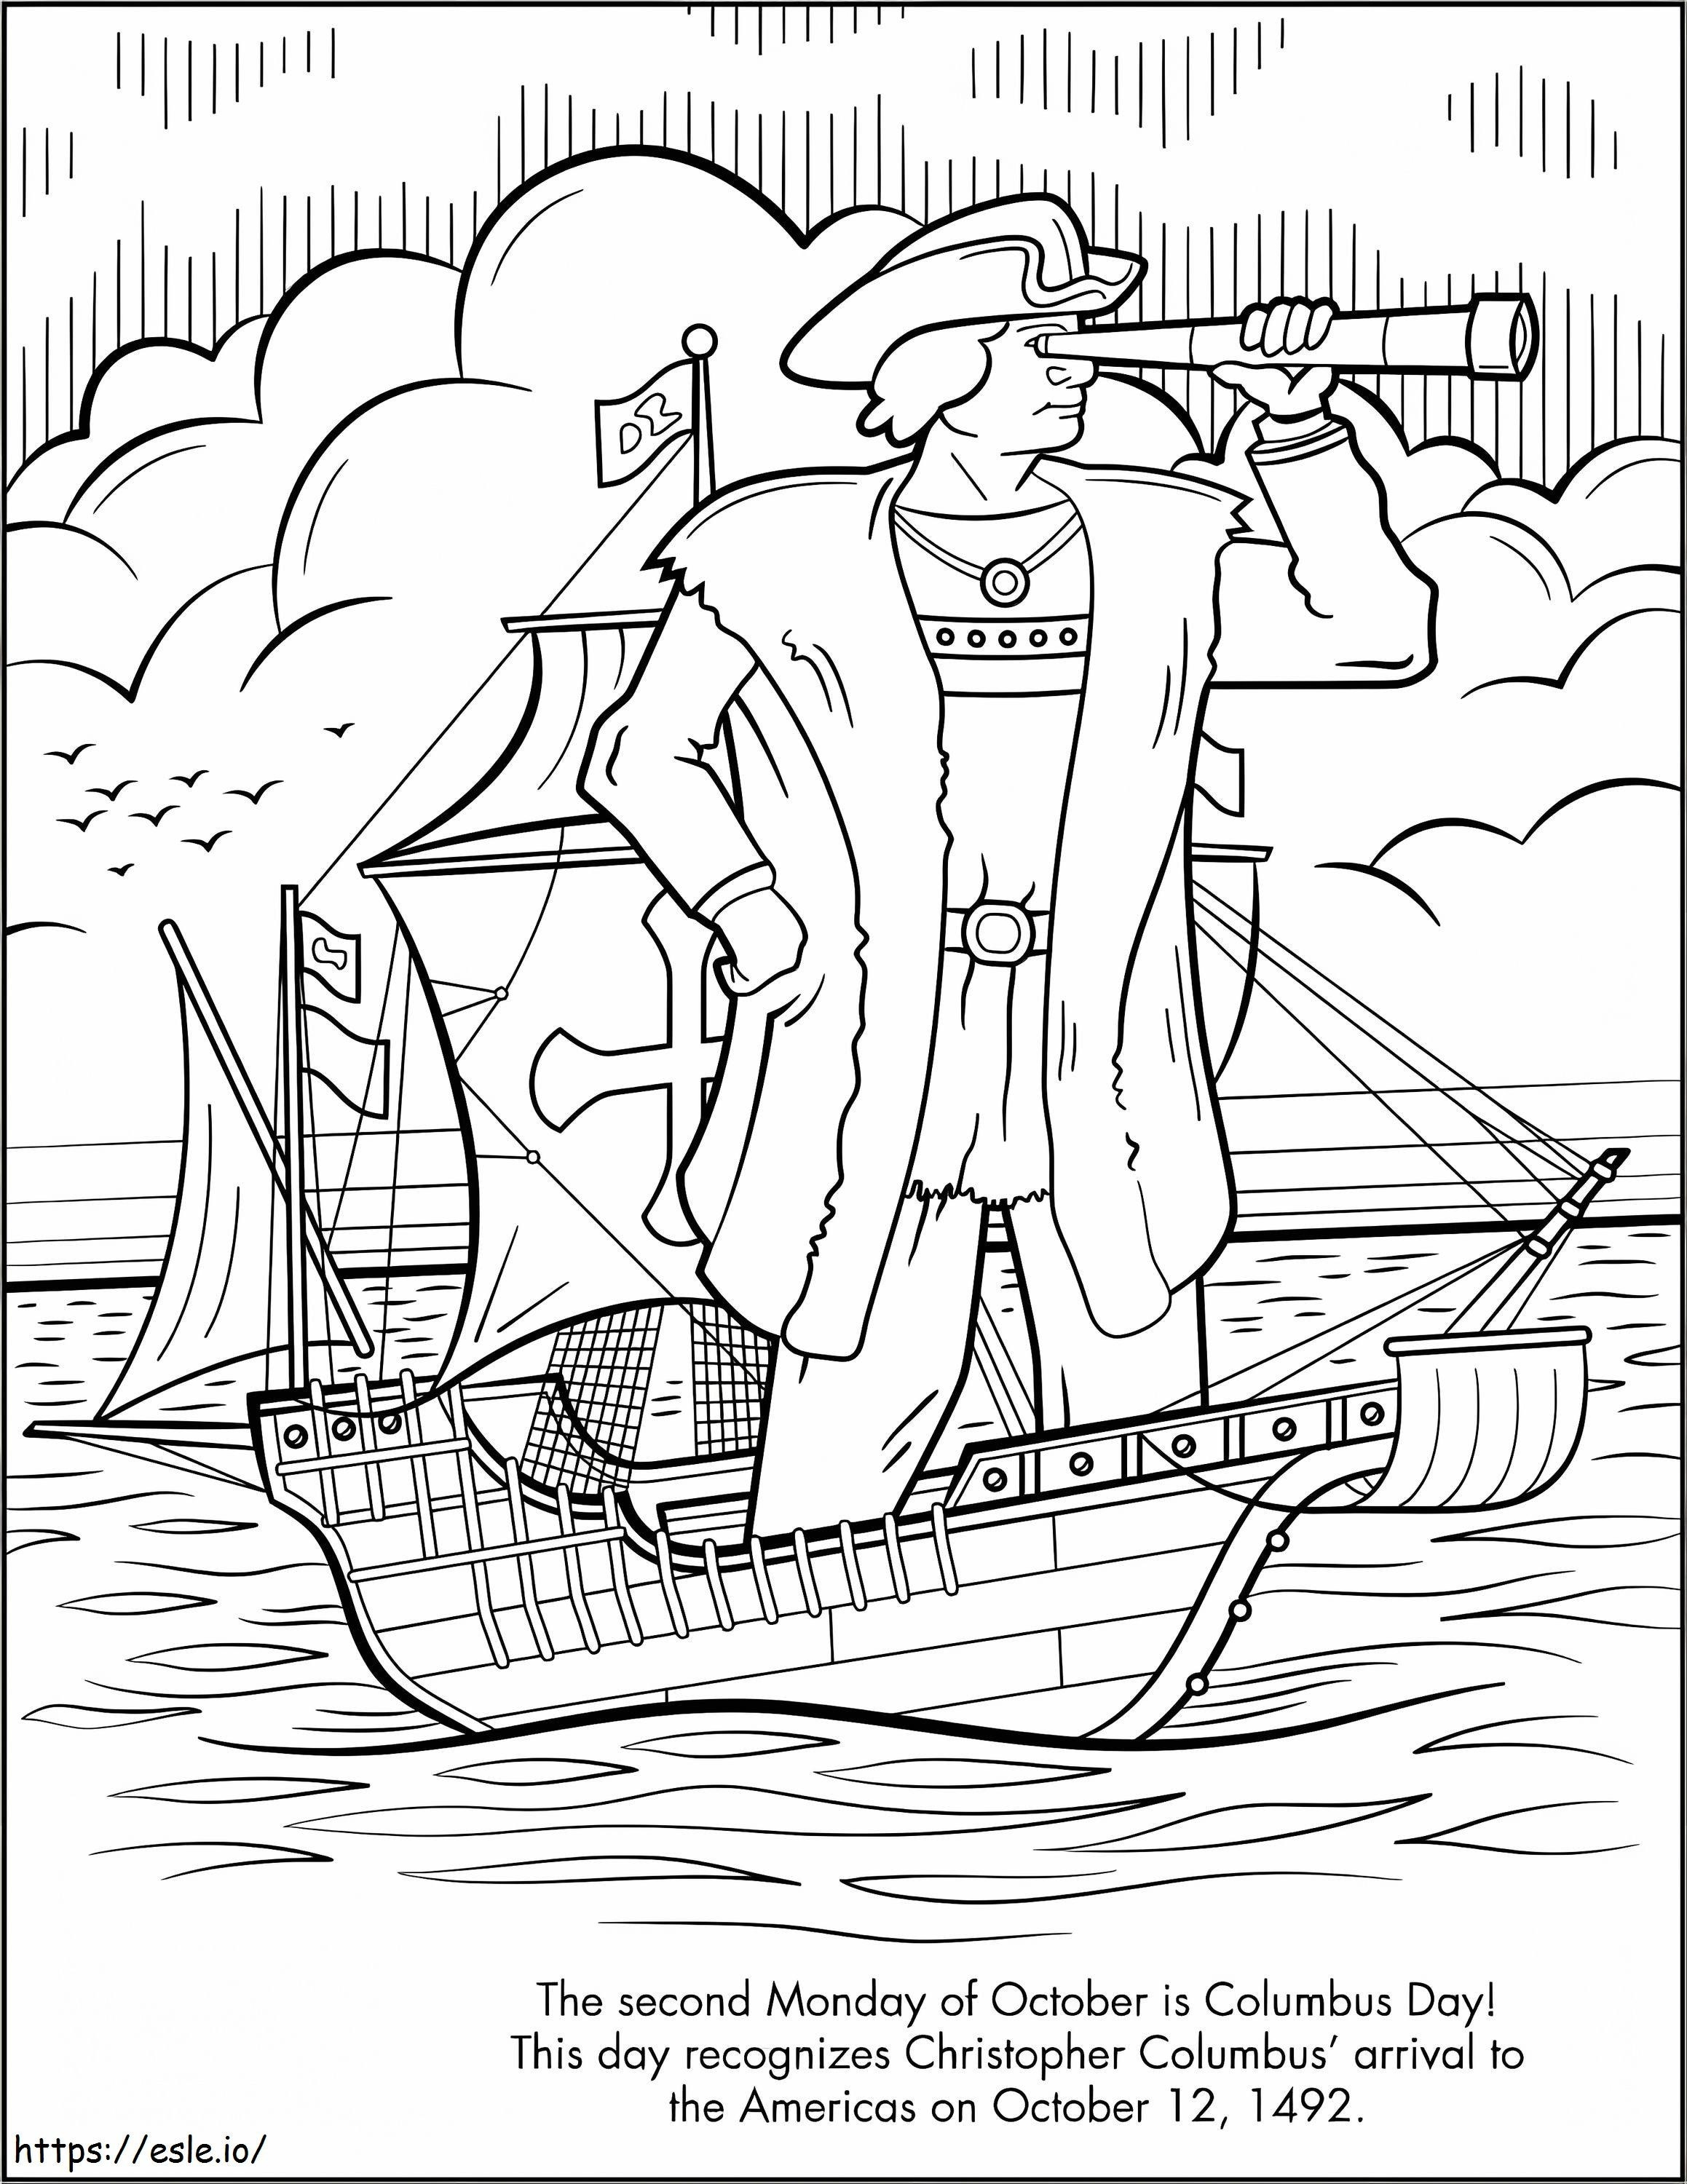 Christopher Columbus 2 coloring page